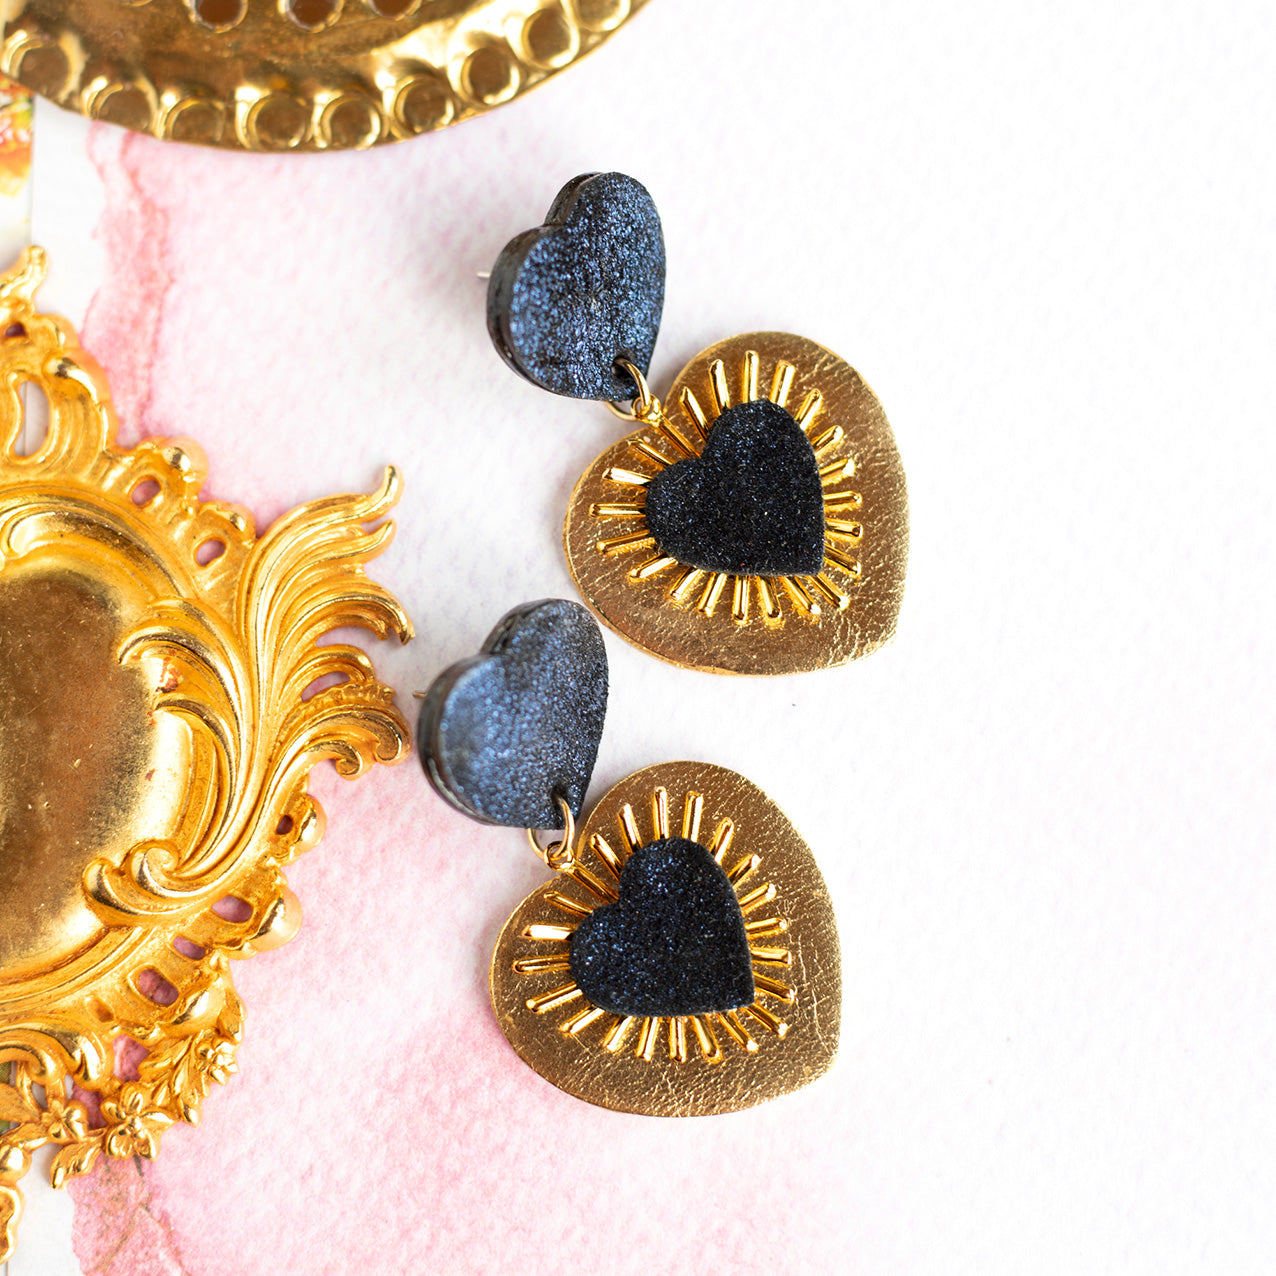 Sacré Coeur earrings in glittery midnight blue and gold leather